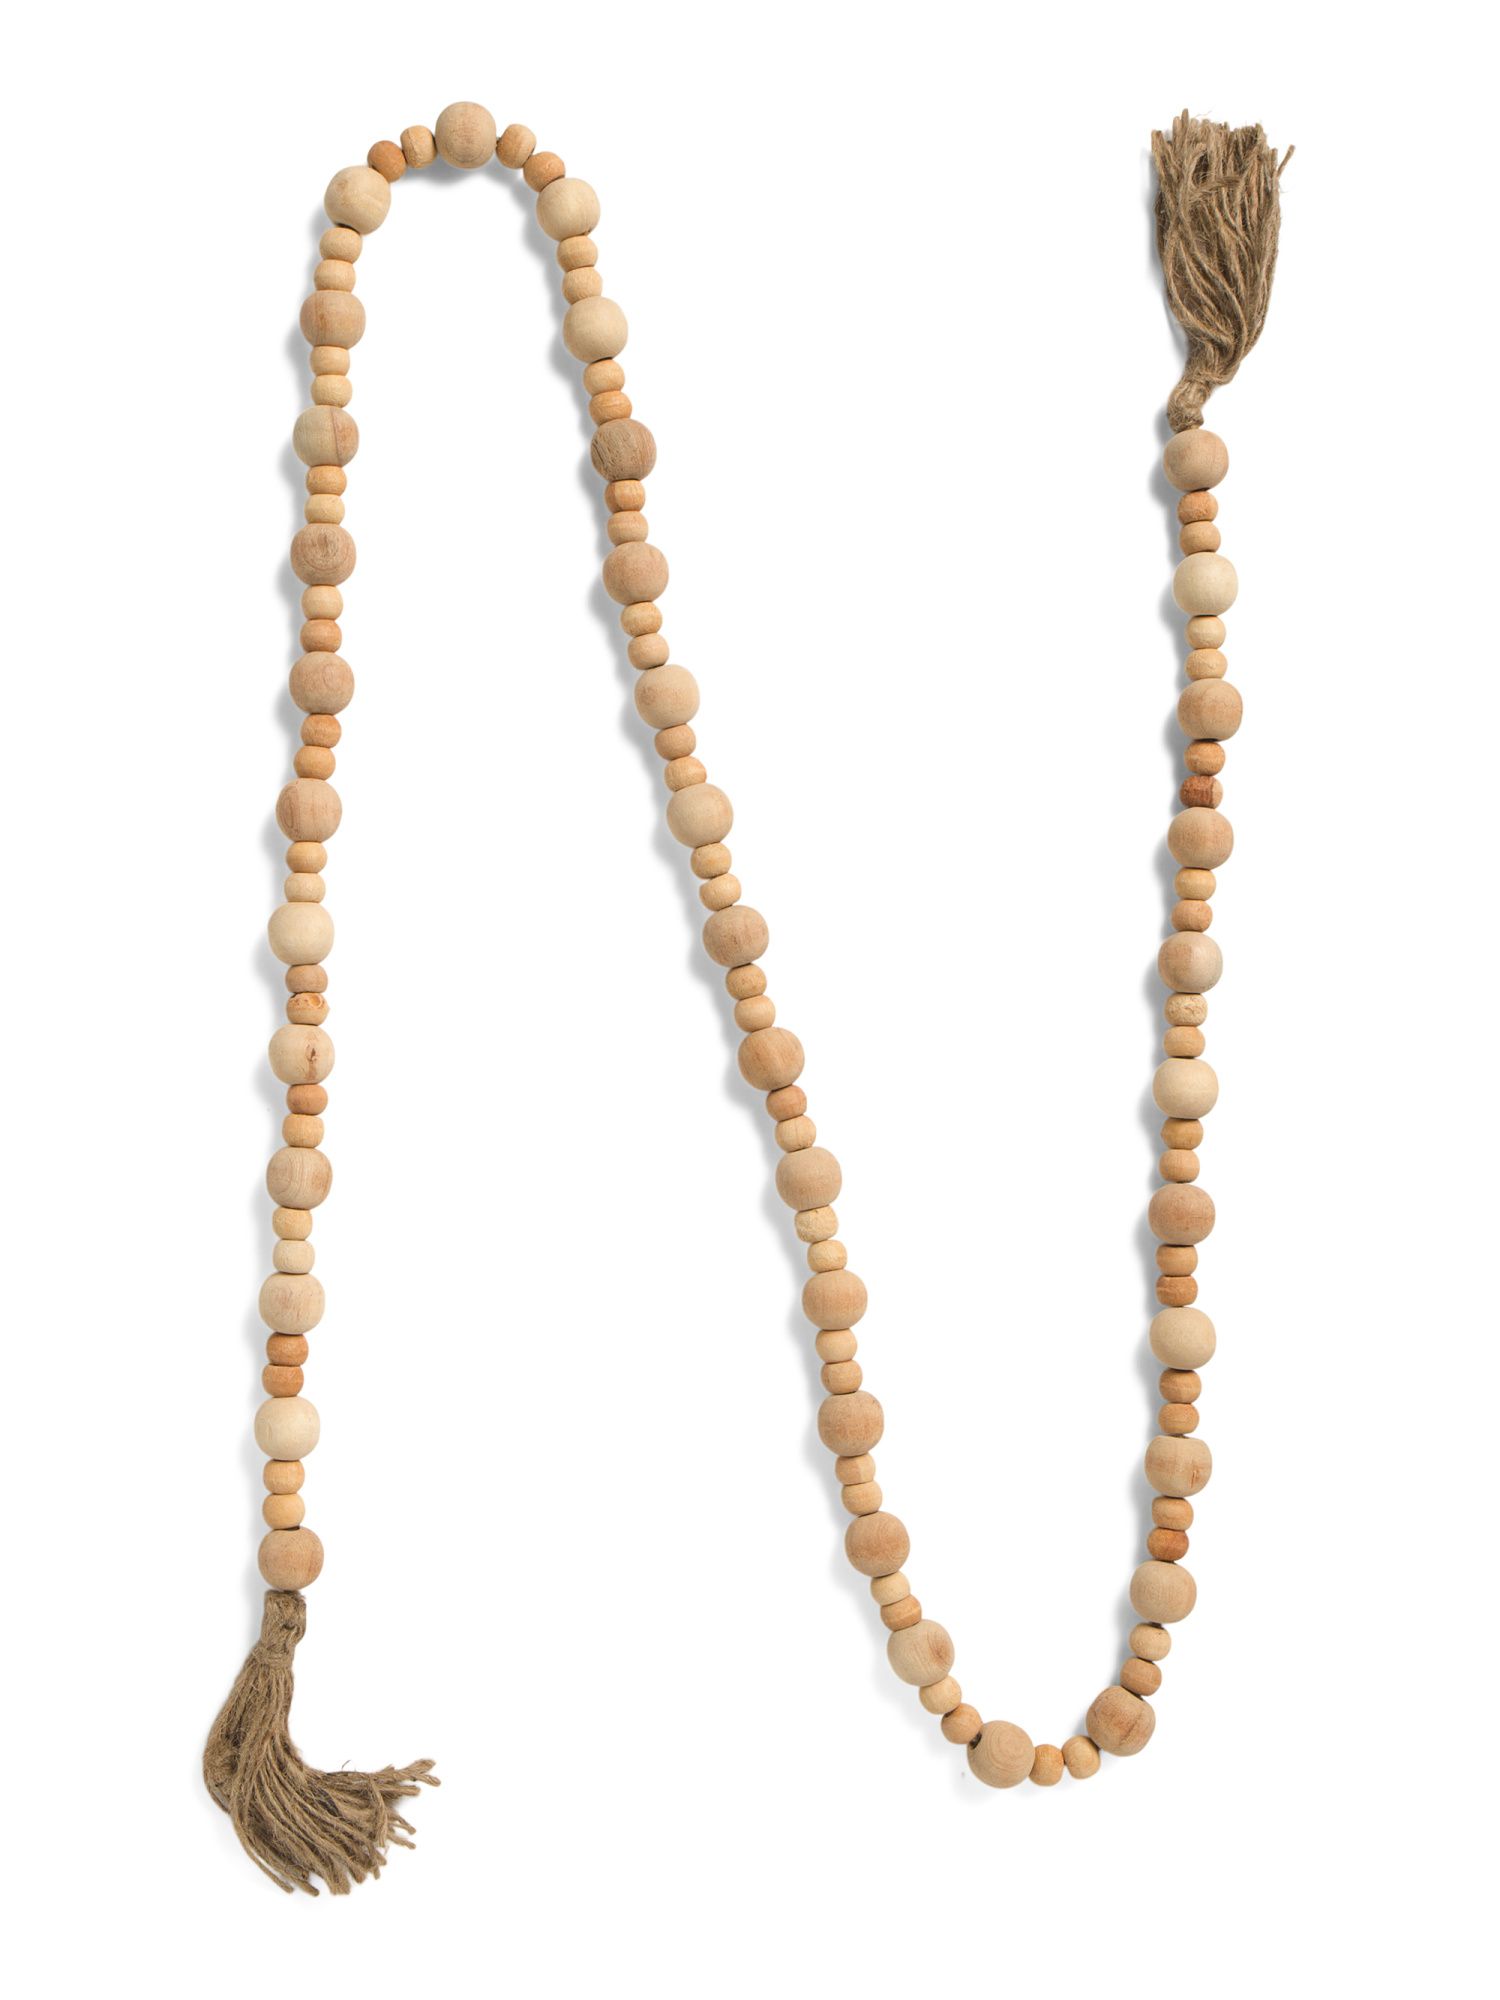 6ft Garland With Distressed Beads | Now & Wow! | Marshalls | Marshalls